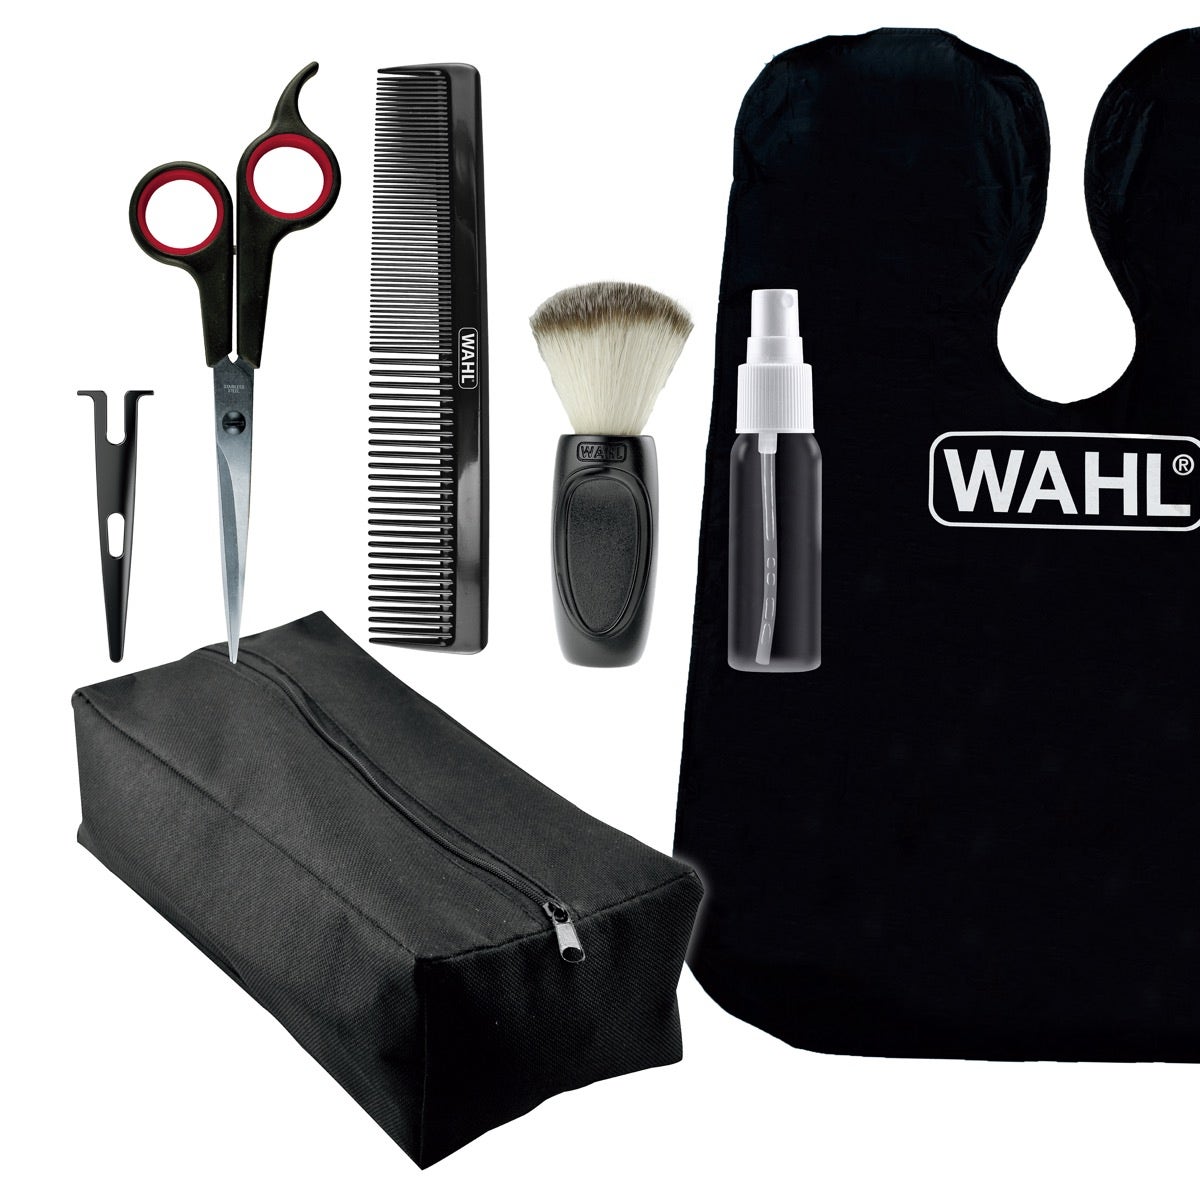 WAHL， Clipper Pro Series Platinum Haircutting Combo Kit with Barbers Shears  Model 79804100， Black 国内正規商品 家電